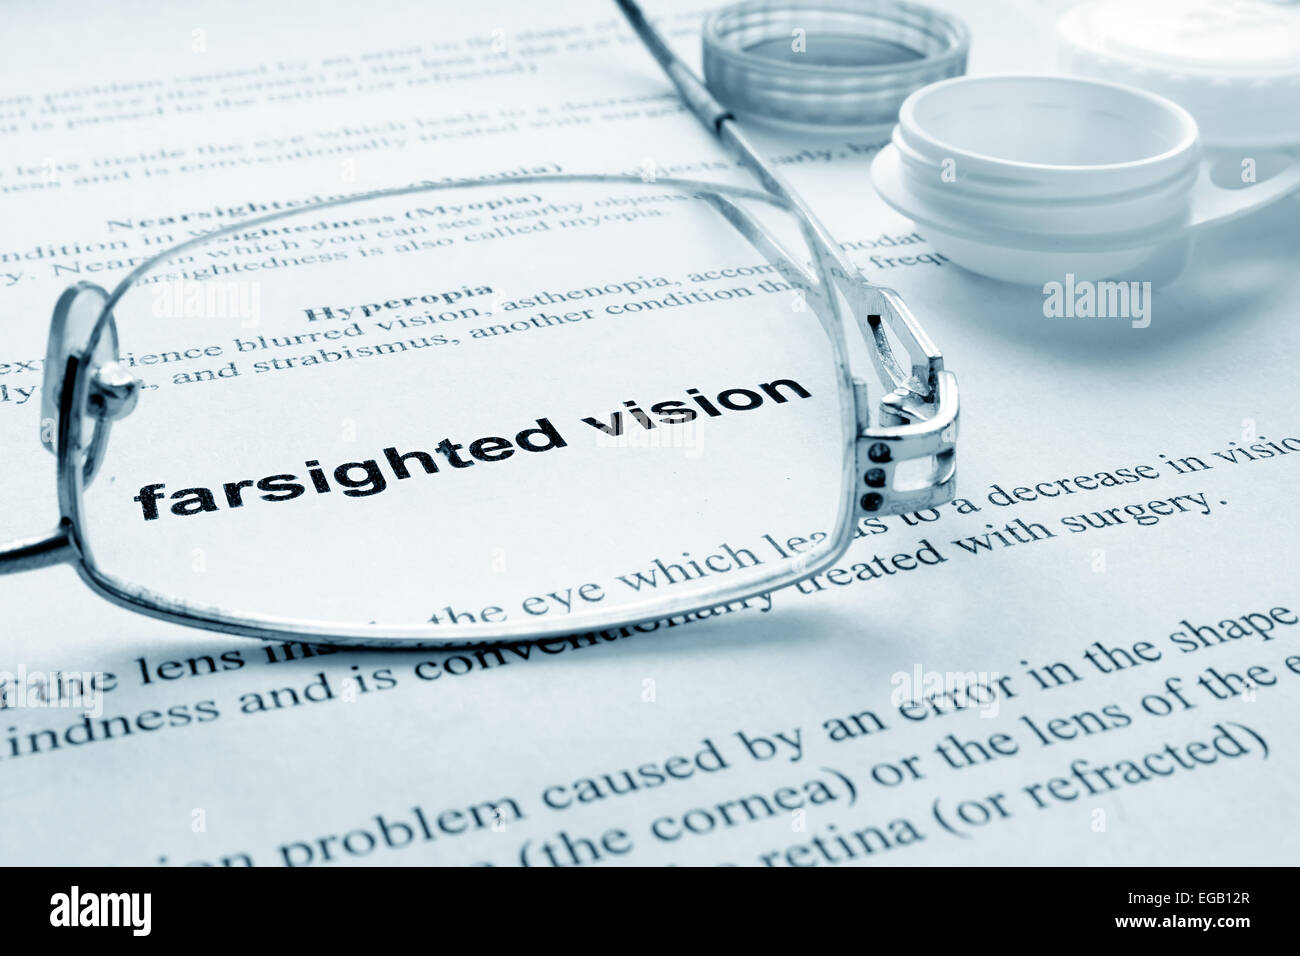 Paper with words  farsighted vision, glasses and container for lenses. Eye disorders. Selective focus. Stock Photo